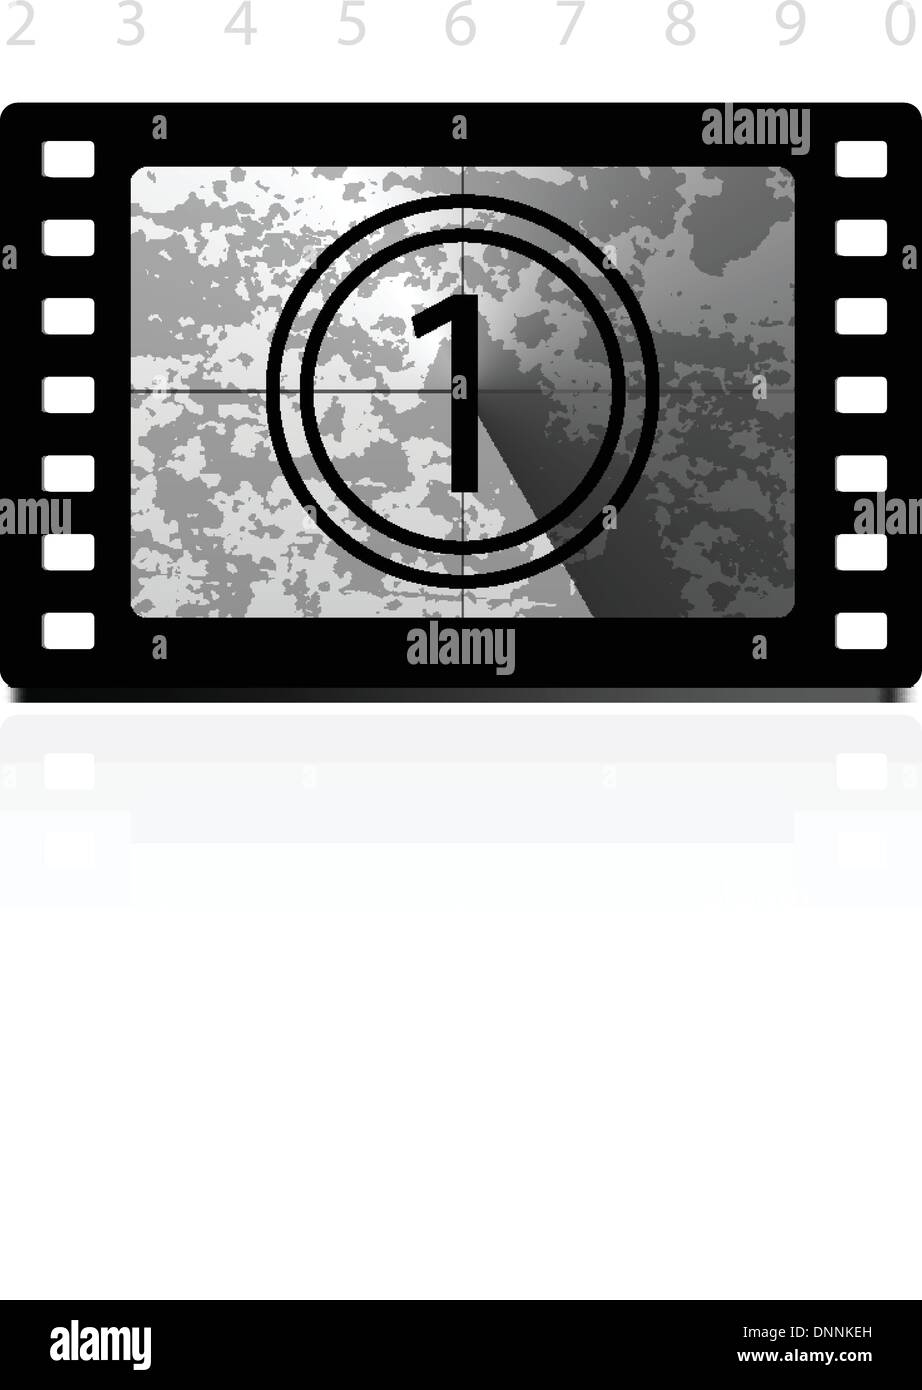 Grunge film countdown. Vector illustration on white background. Easy to remove grunge effect. Stock Vector